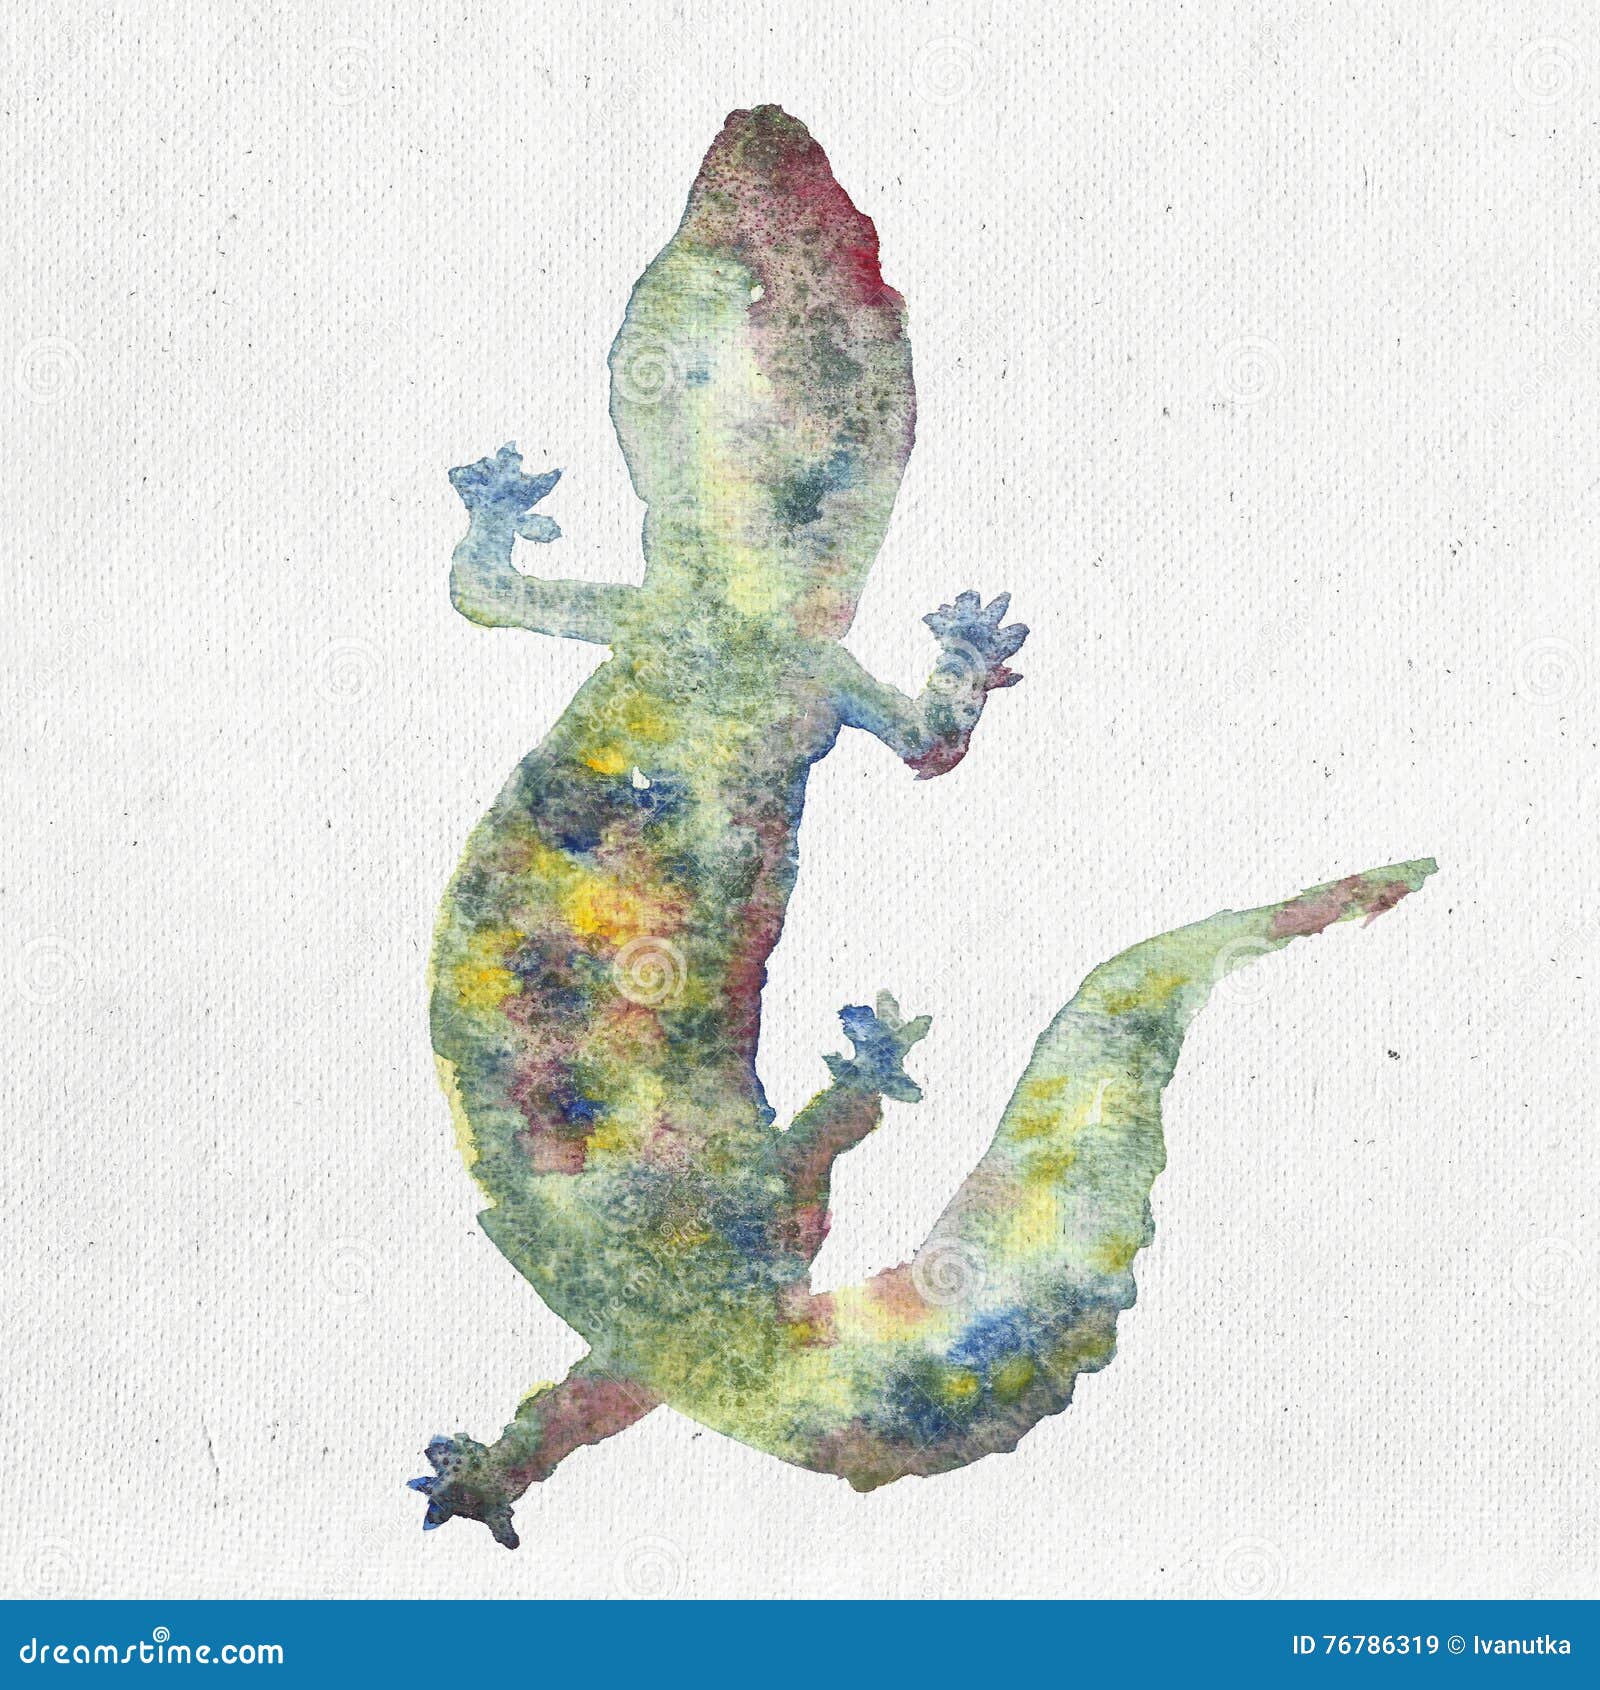 Watercolor Illustration Of A Gecko Silhouette Stock Illustration - Illustration Of Wild, Animal: 76786319